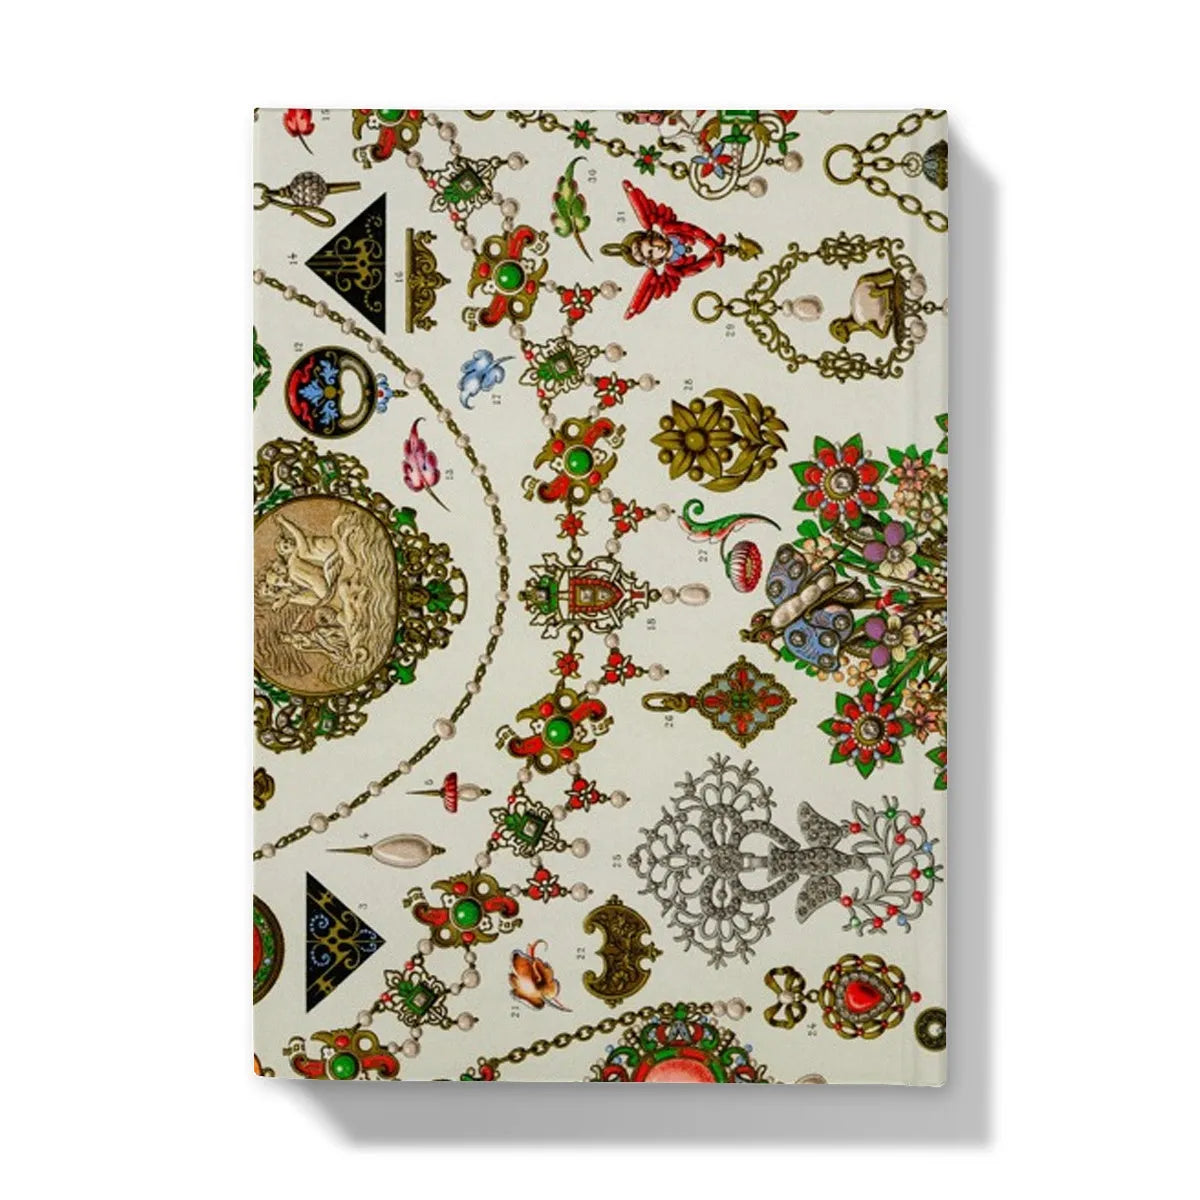 French Jewelry By Auguste Racinet Hardback Journal - Notebooks & Notepads - Aesthetic Art